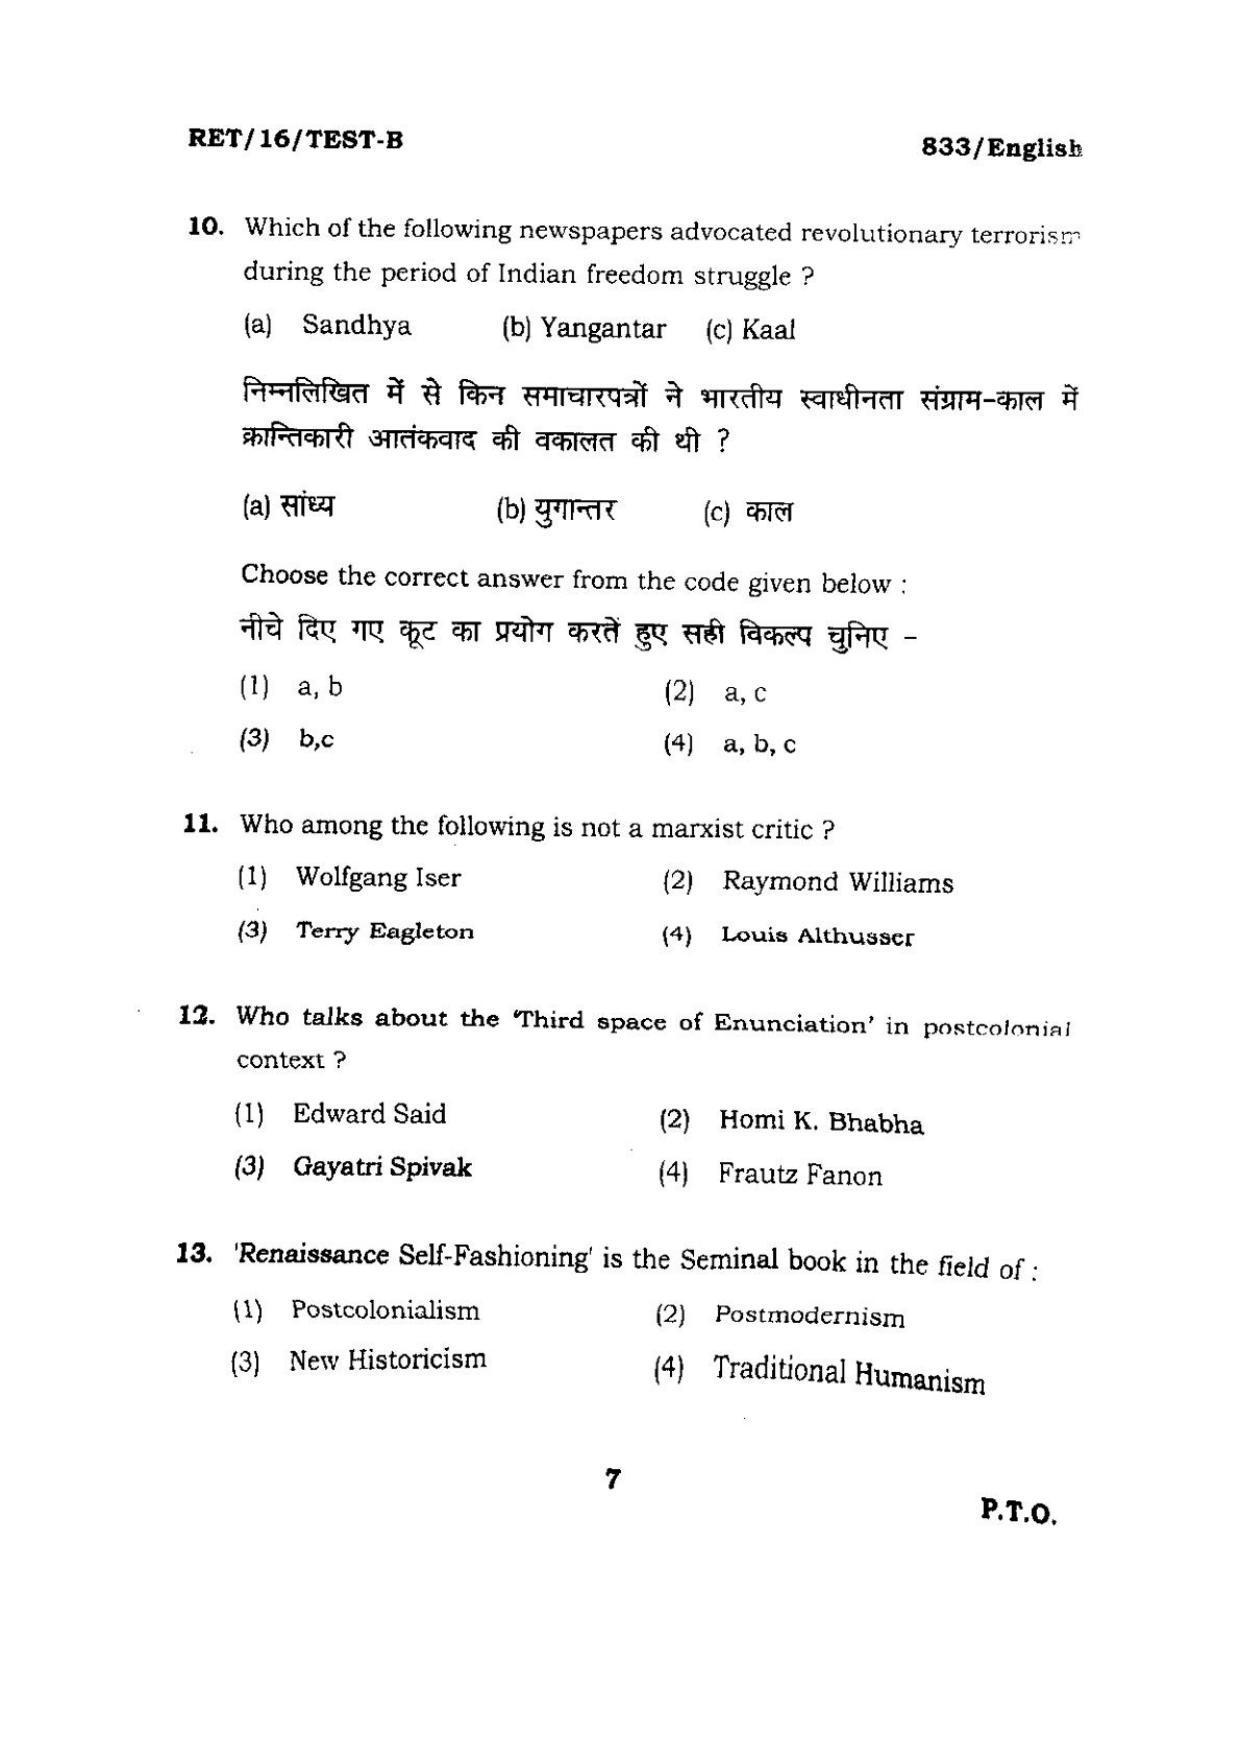 BHU RET ENGLISH 2016 Question Paper - Page 7